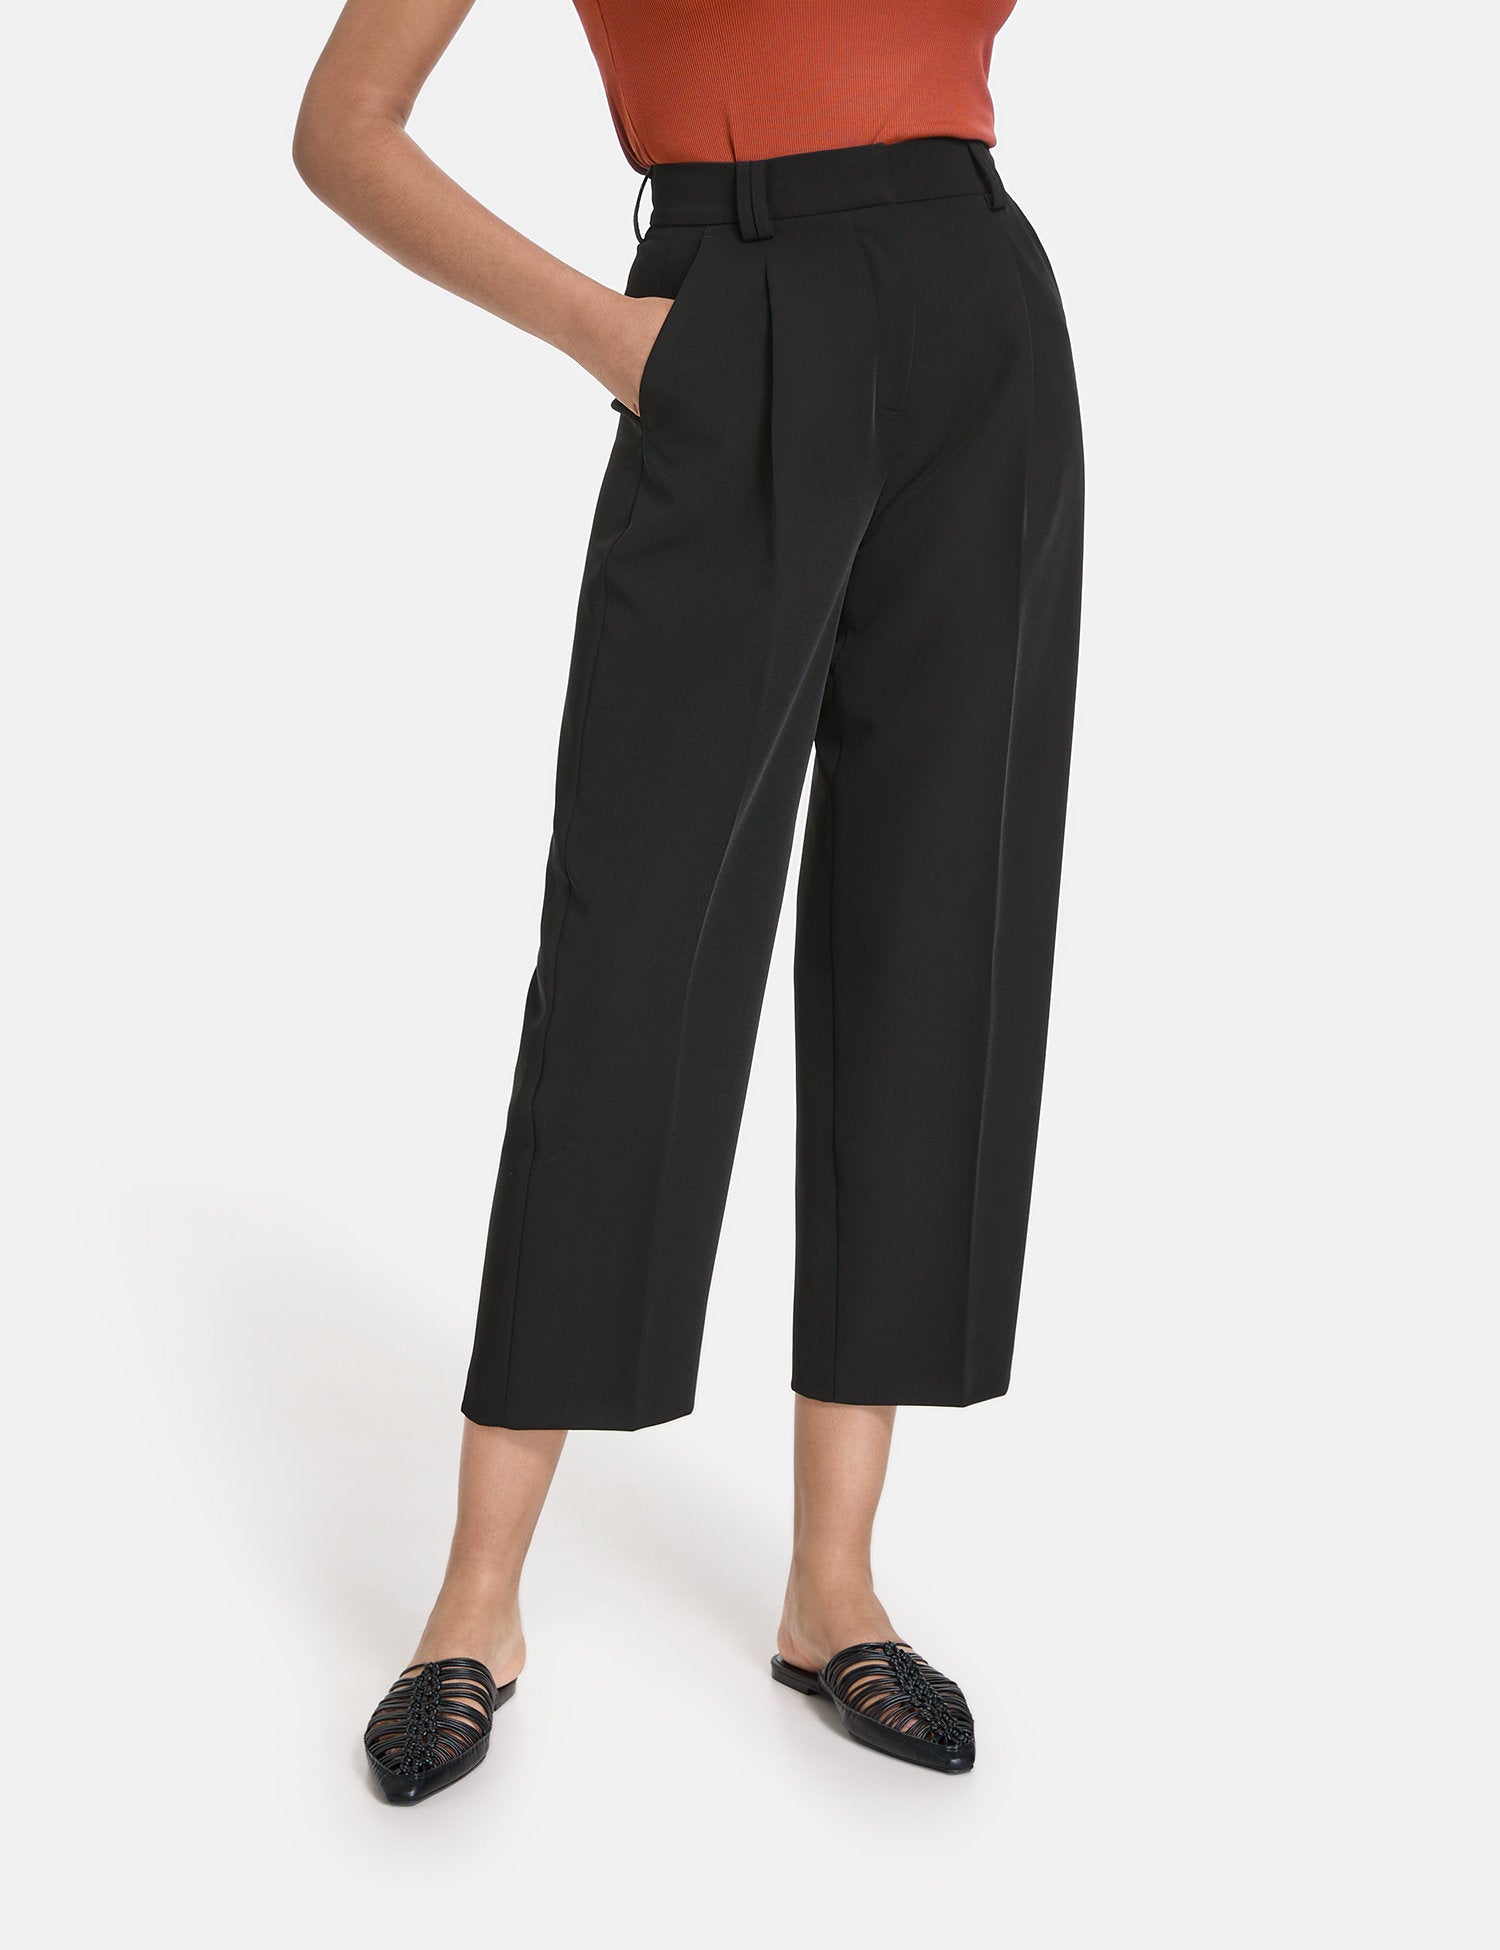 Smart 3/4-Length Trousers_520347-11087_1100_04